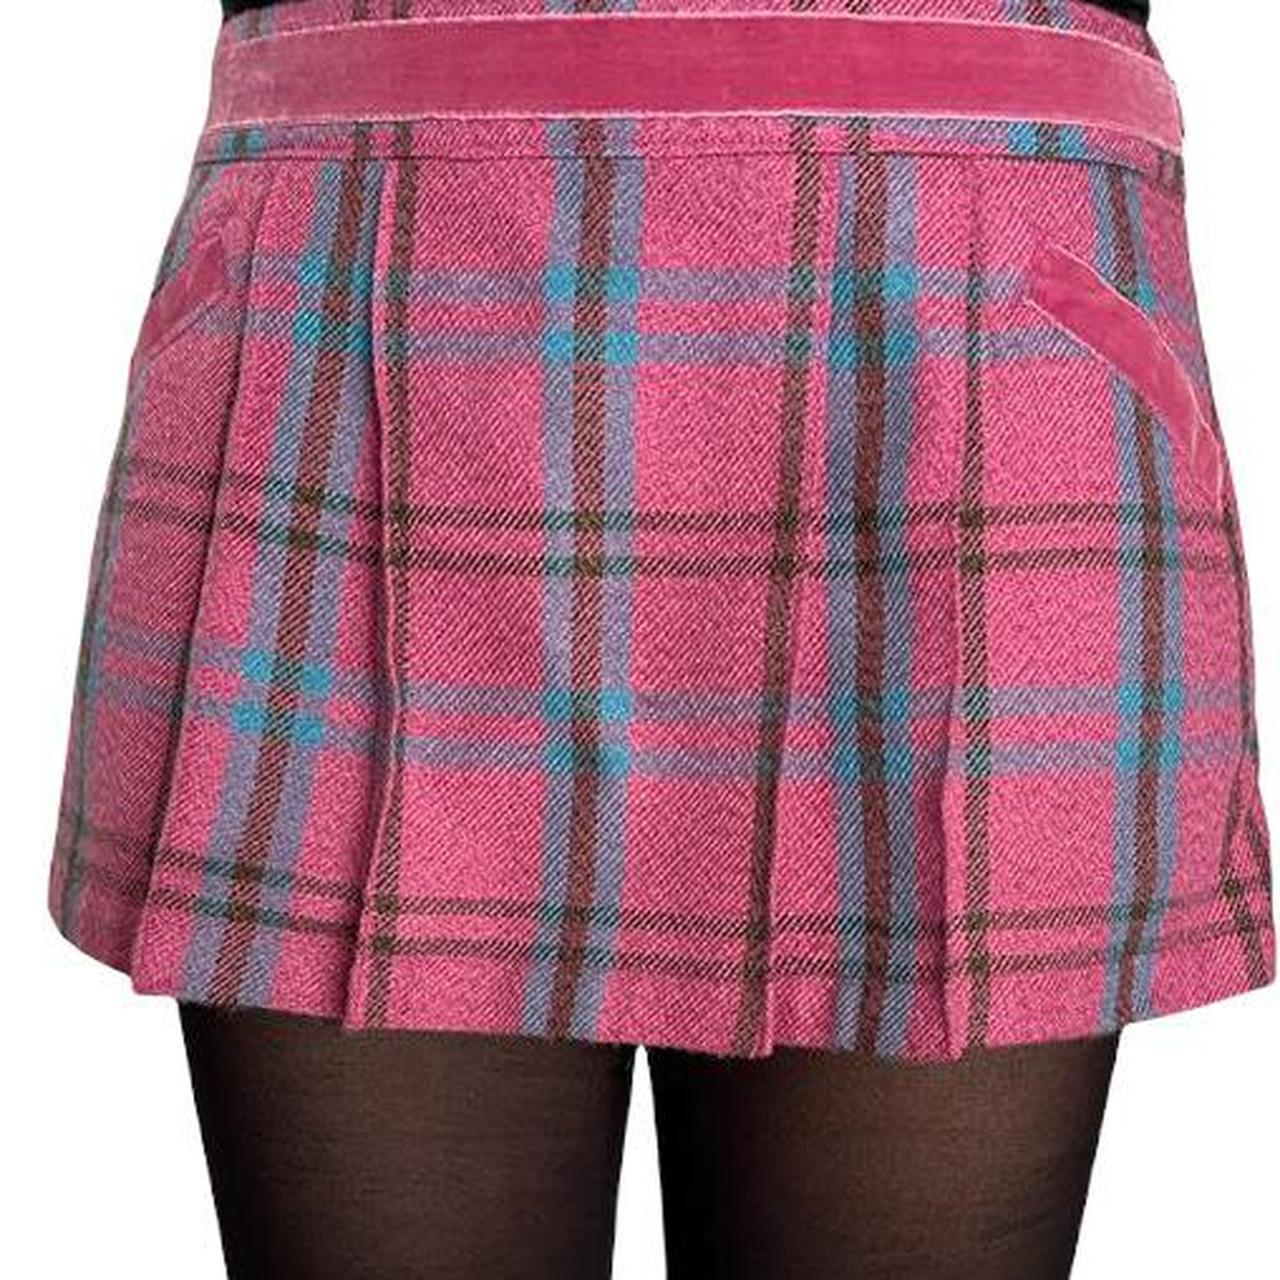 Abercrombie & Fitch Women's Pink and Blue Skirt